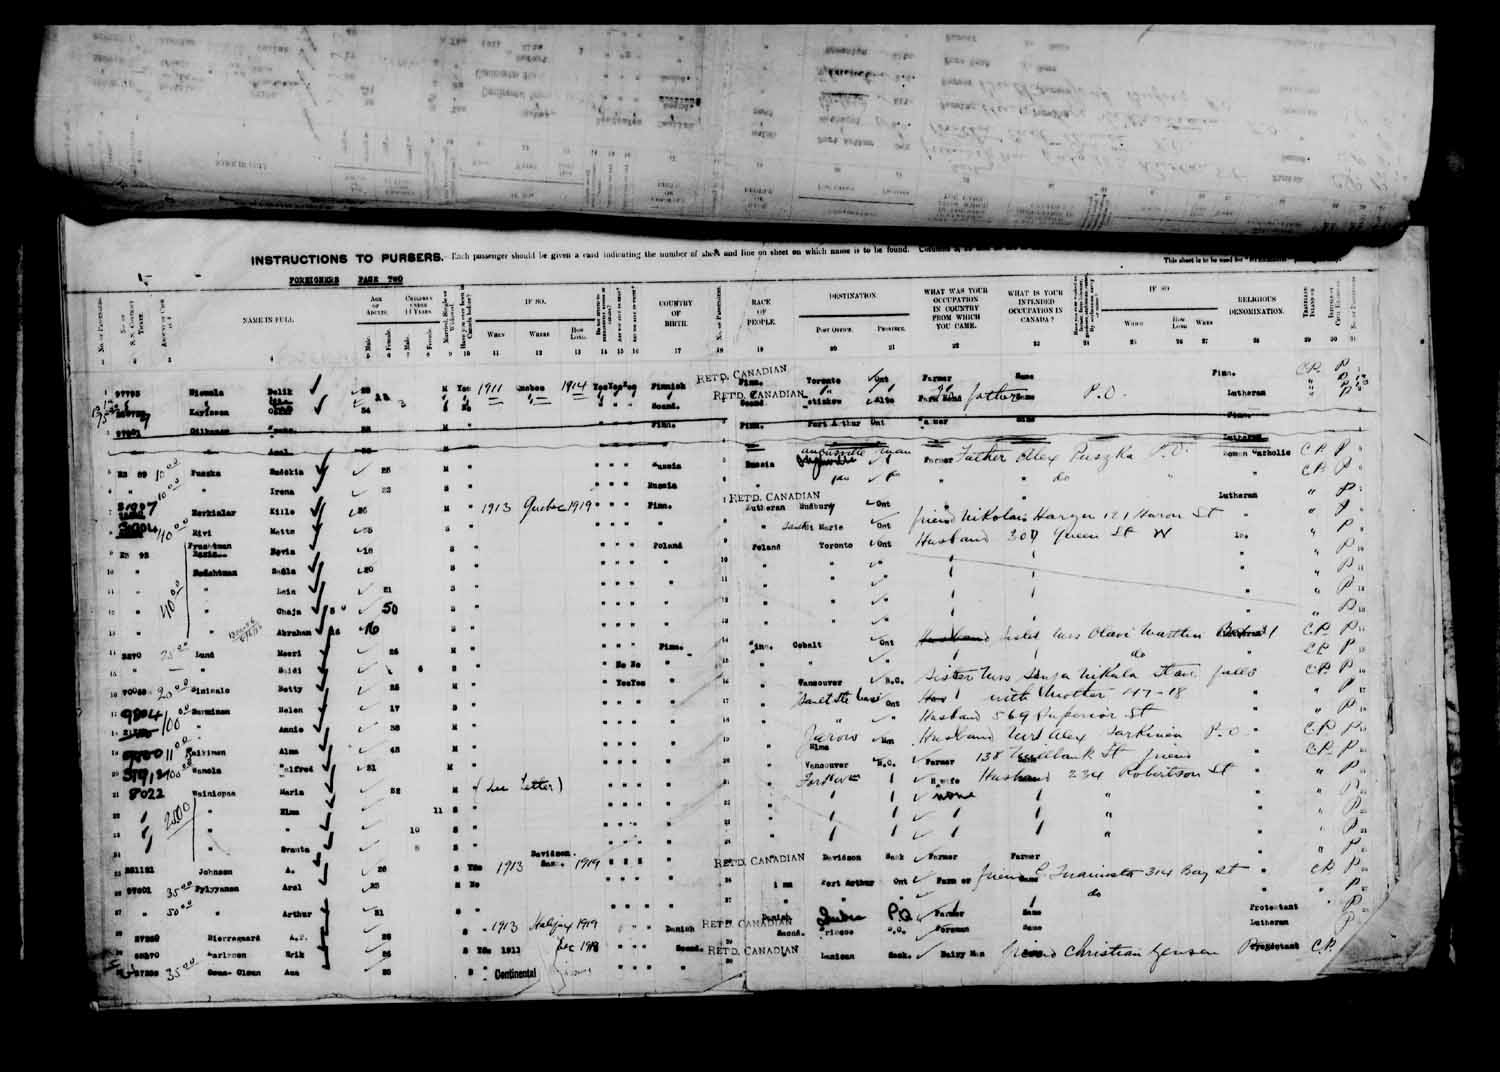 Digitized page of Passenger Lists for Image No.: e003610675